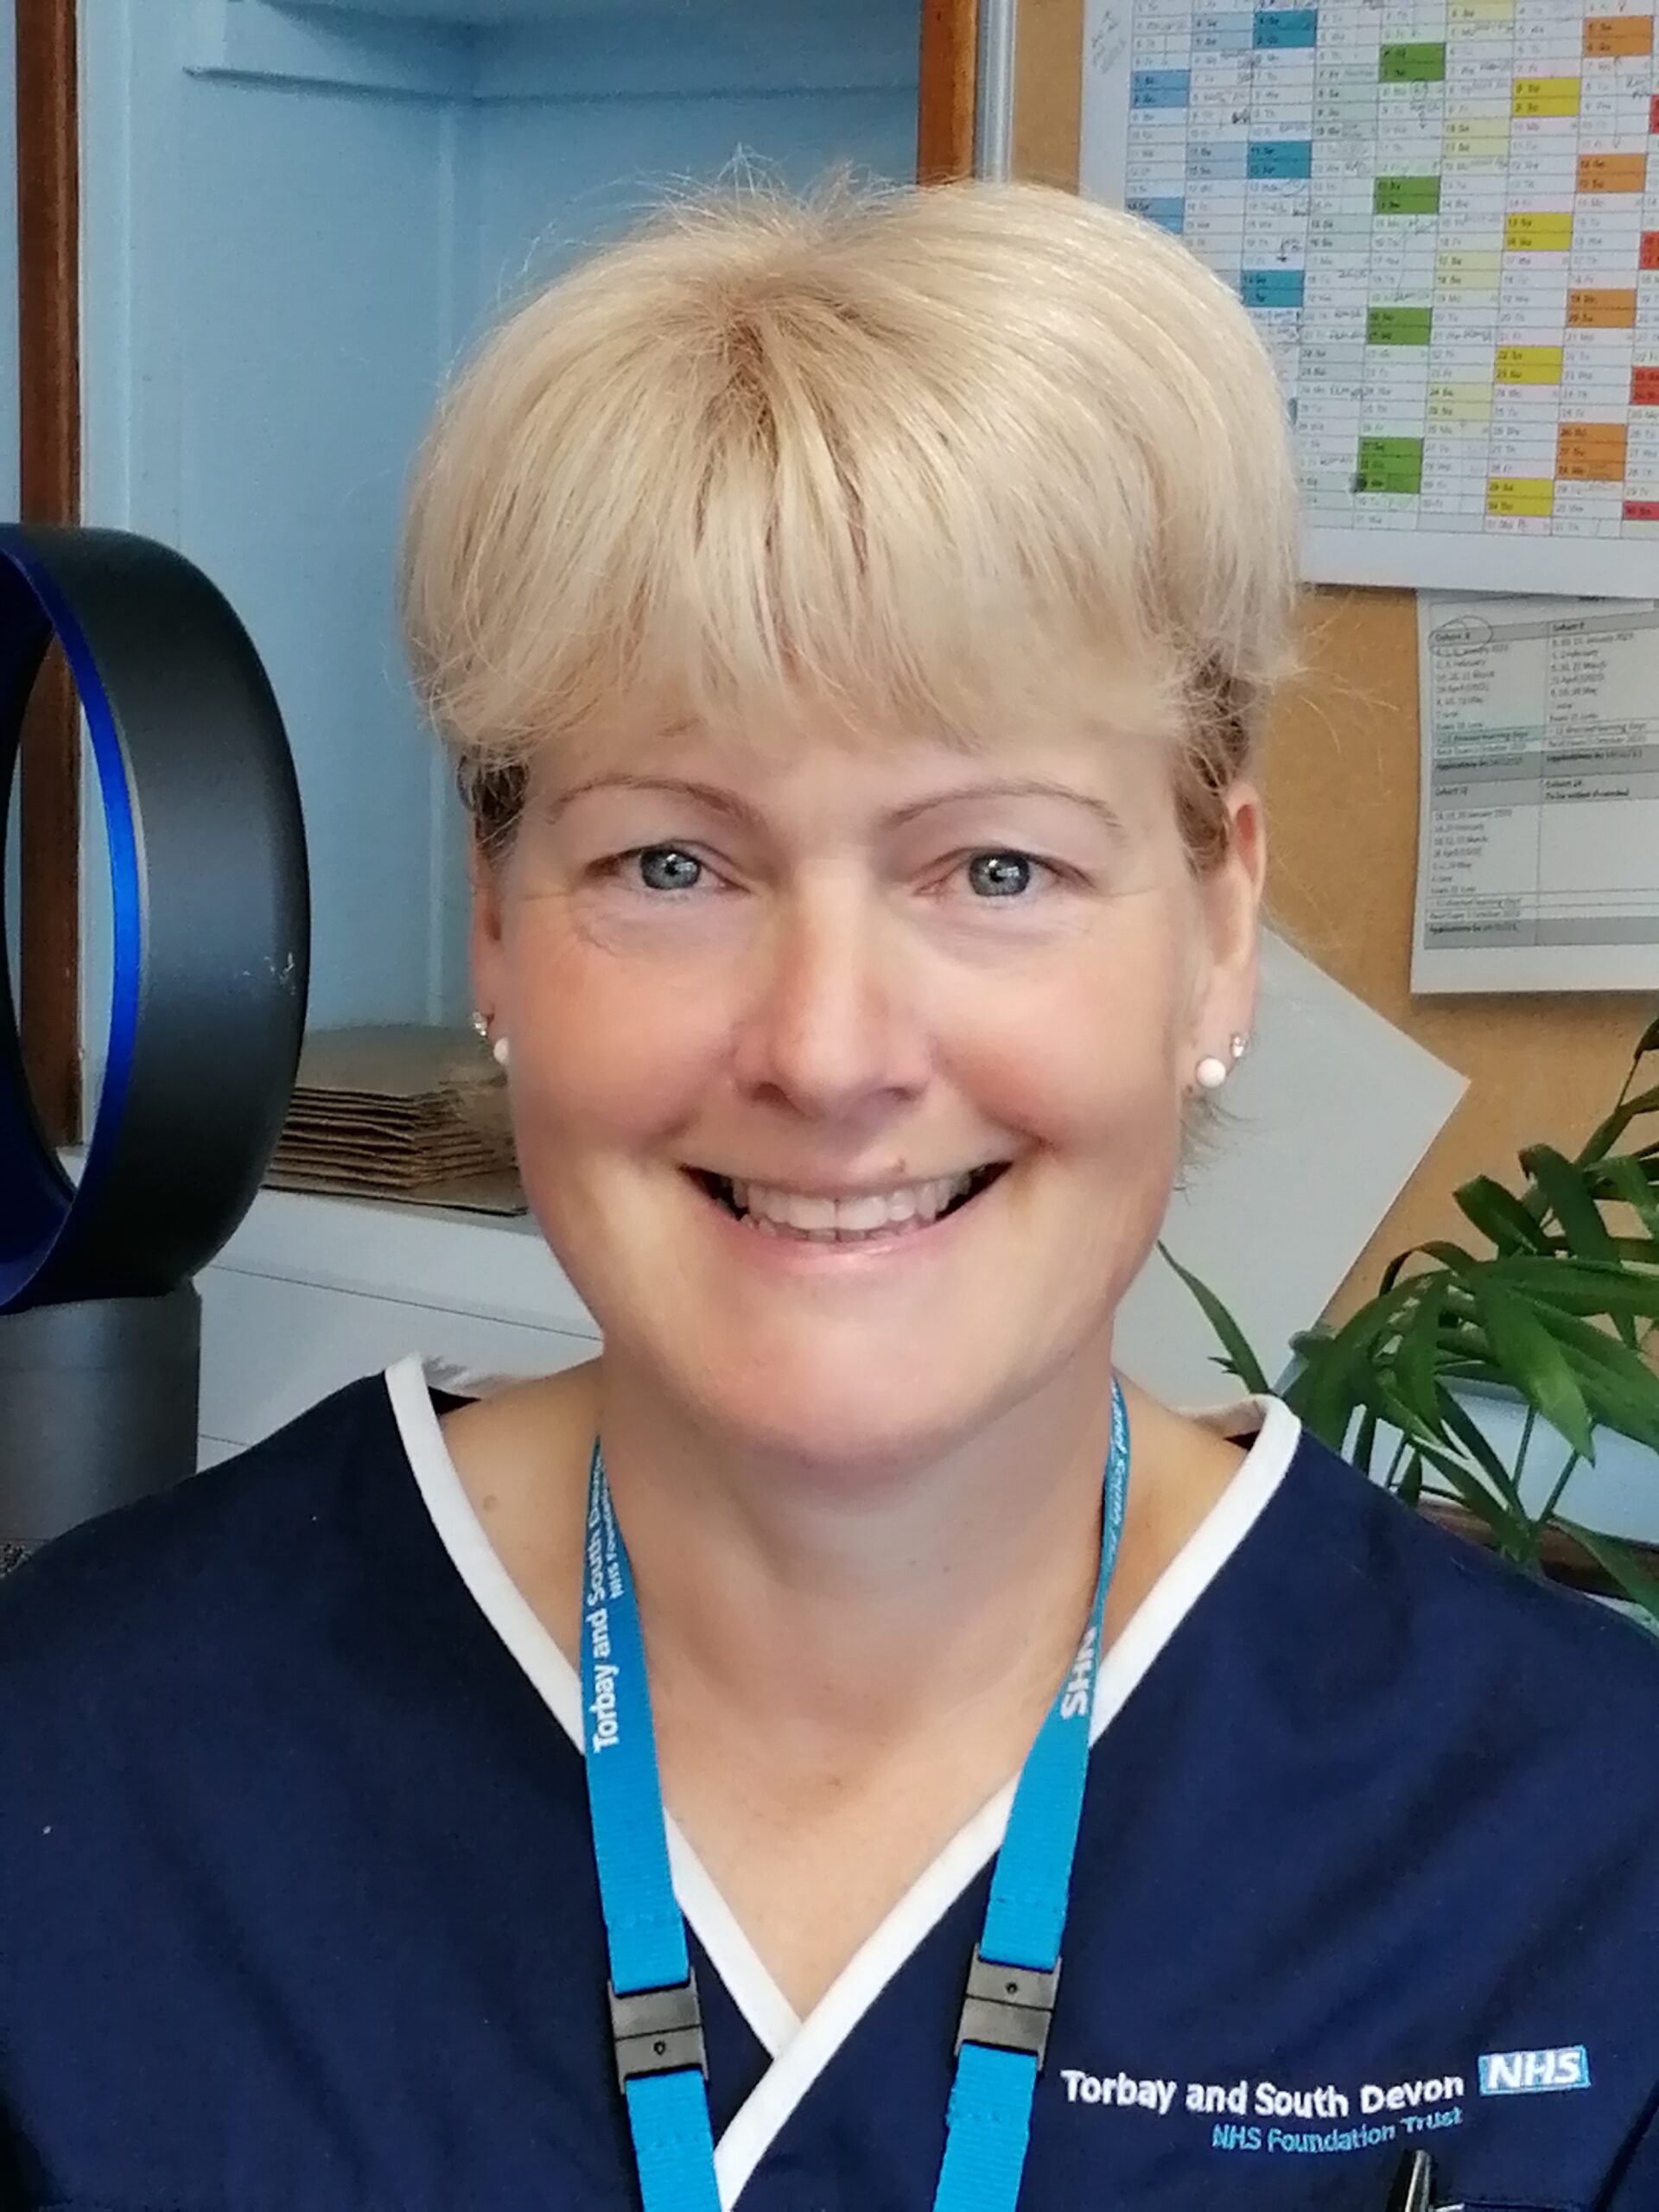 Becky, a white woman, has short blonde hair and is wearing pearl earrings. She is smiling and wearing an NHS lanyard and dark blue nurses uniform.